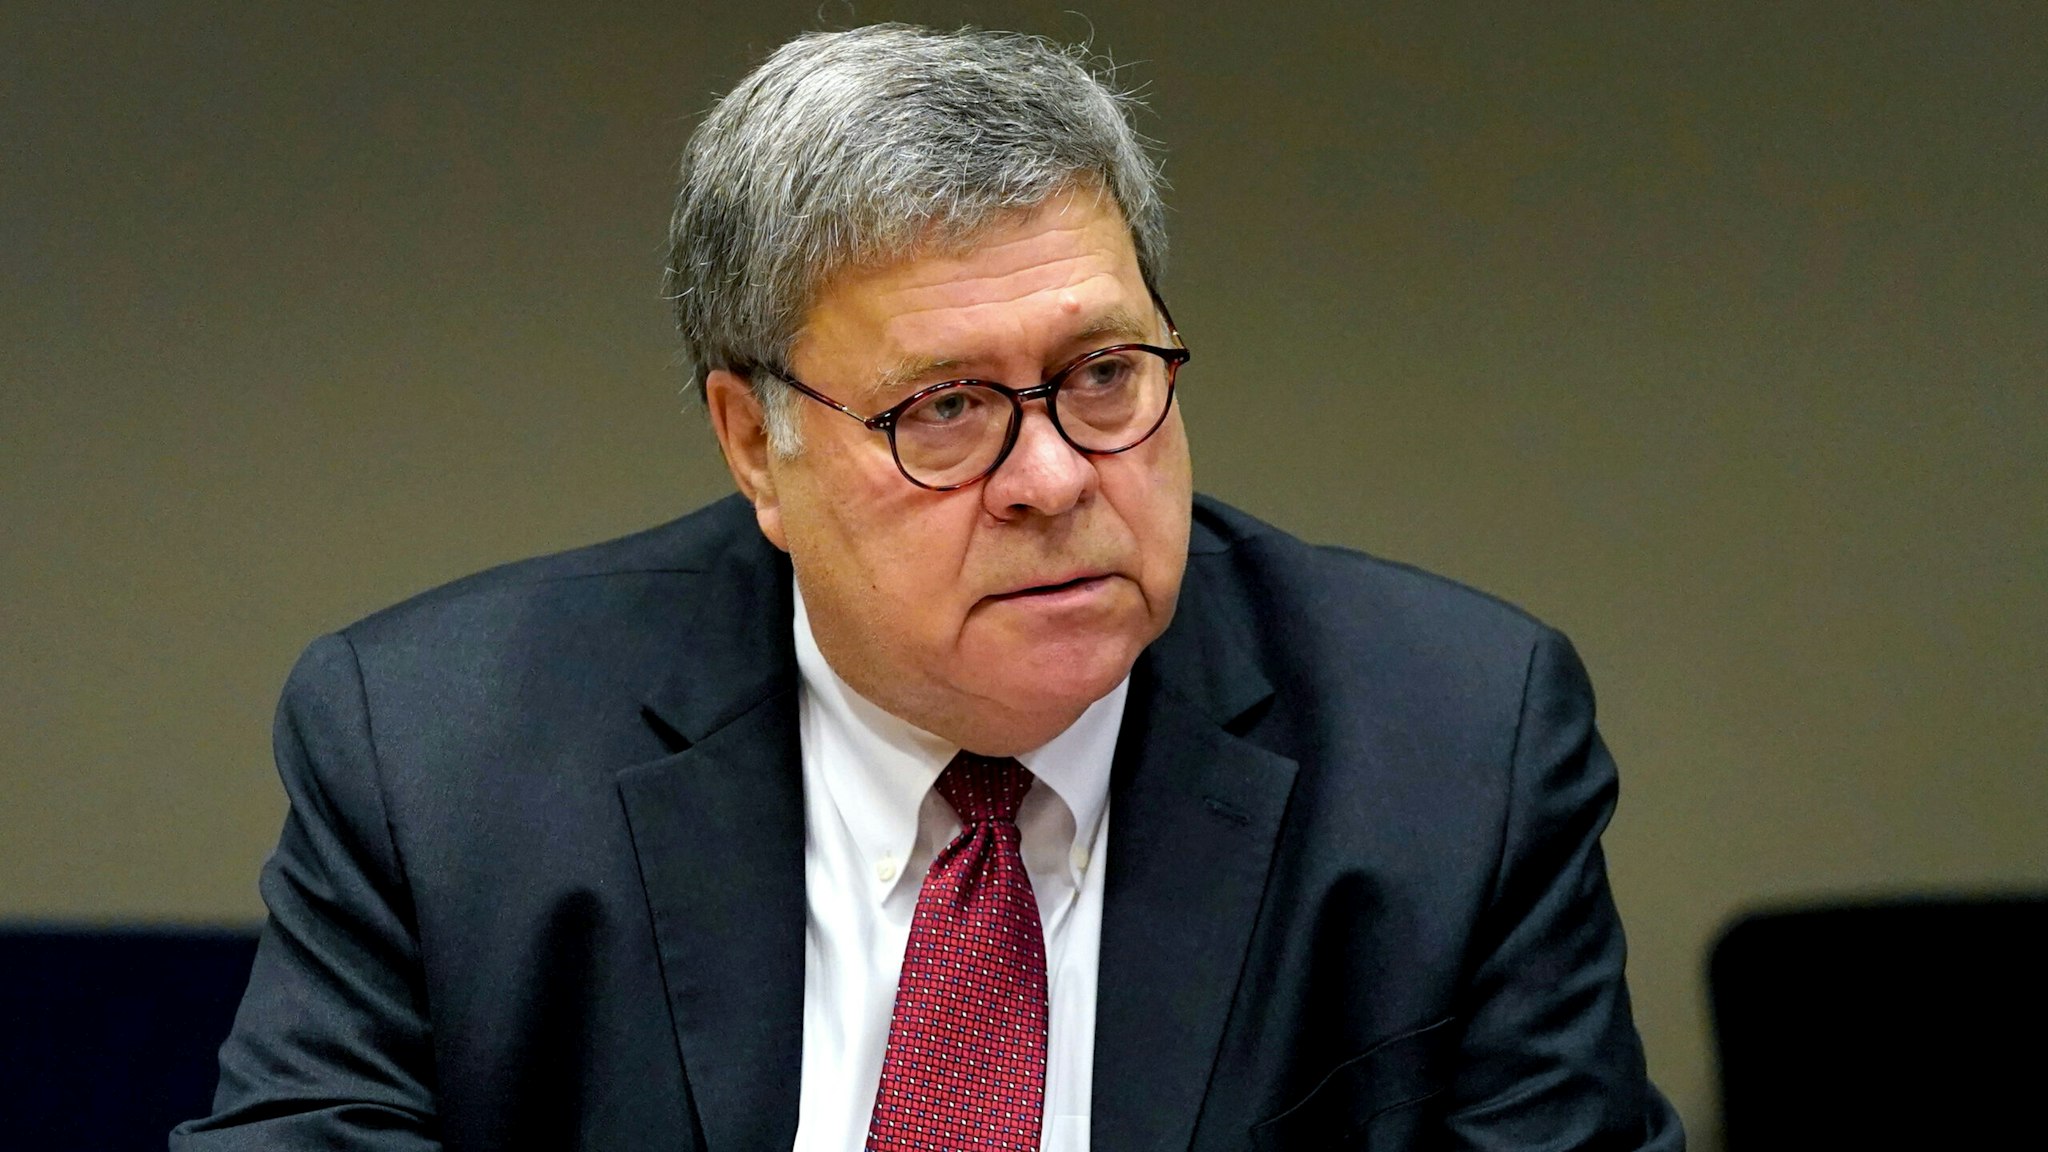 US Attorney General William Barr, left, meets with members of the St. Louis Police Department, October 15, 2020, in St. Louis, Missouri. - The officers are among several in the department who have been shot in the line of duty this year.